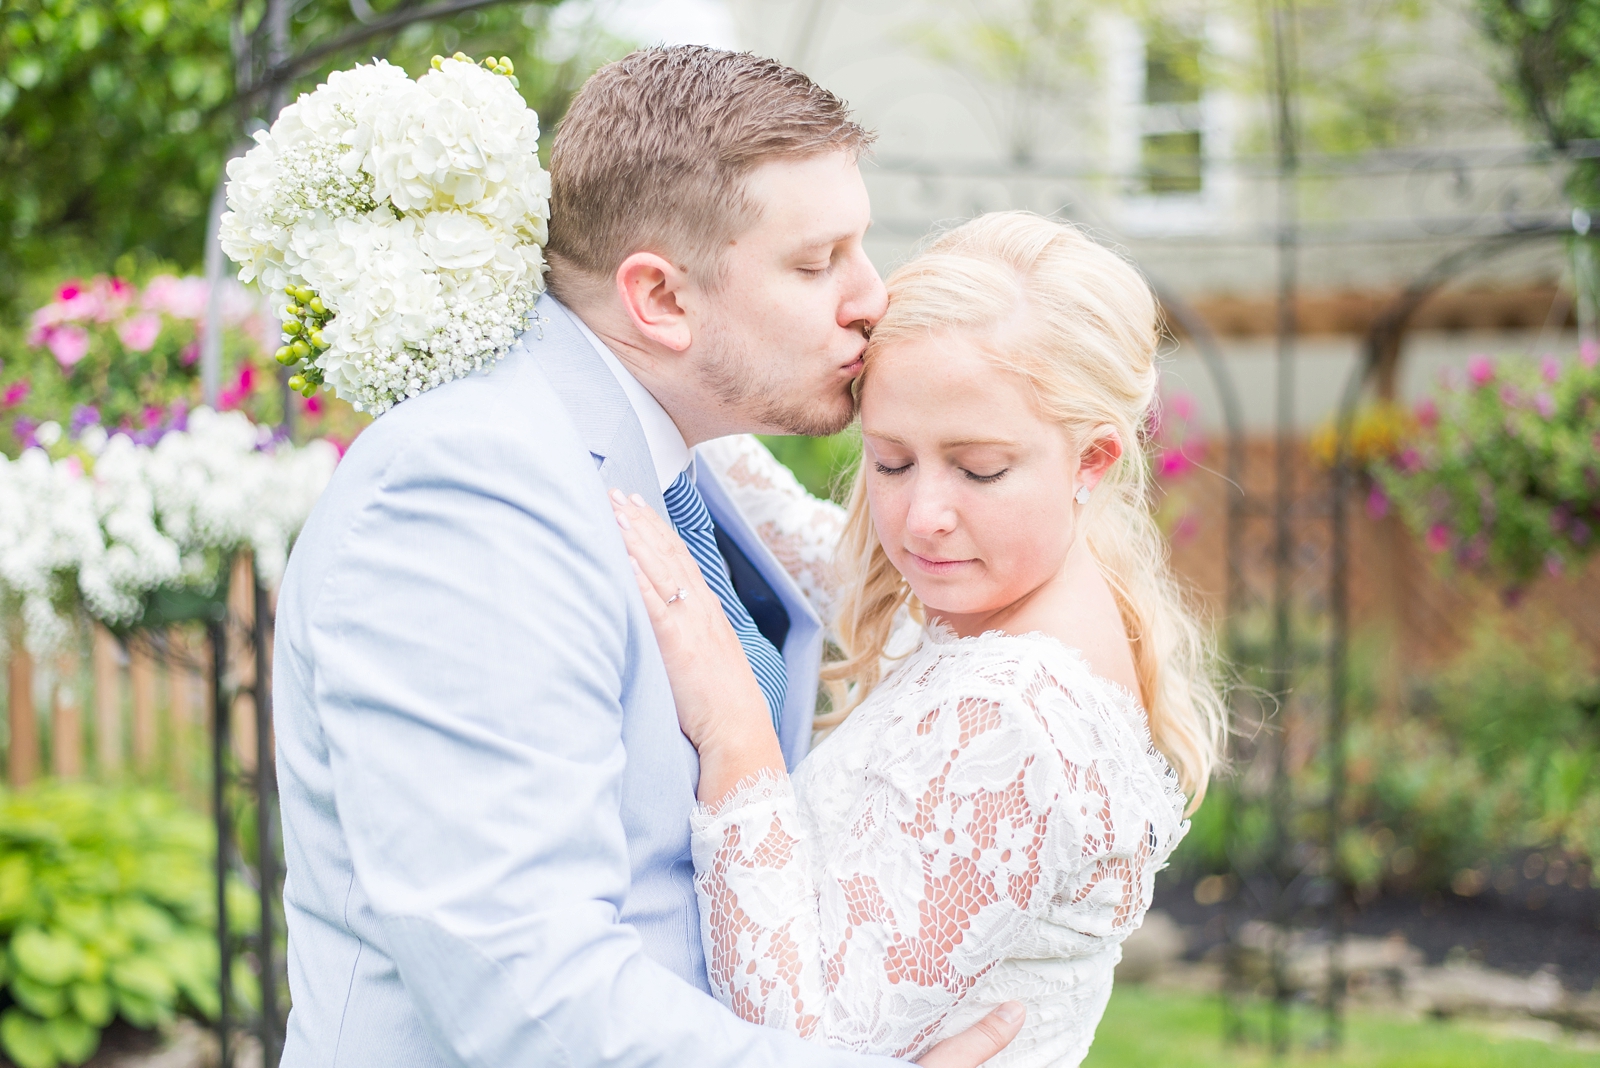 bride-holding-a-bouquet-while-her-groom-is-kissing-her-forehead